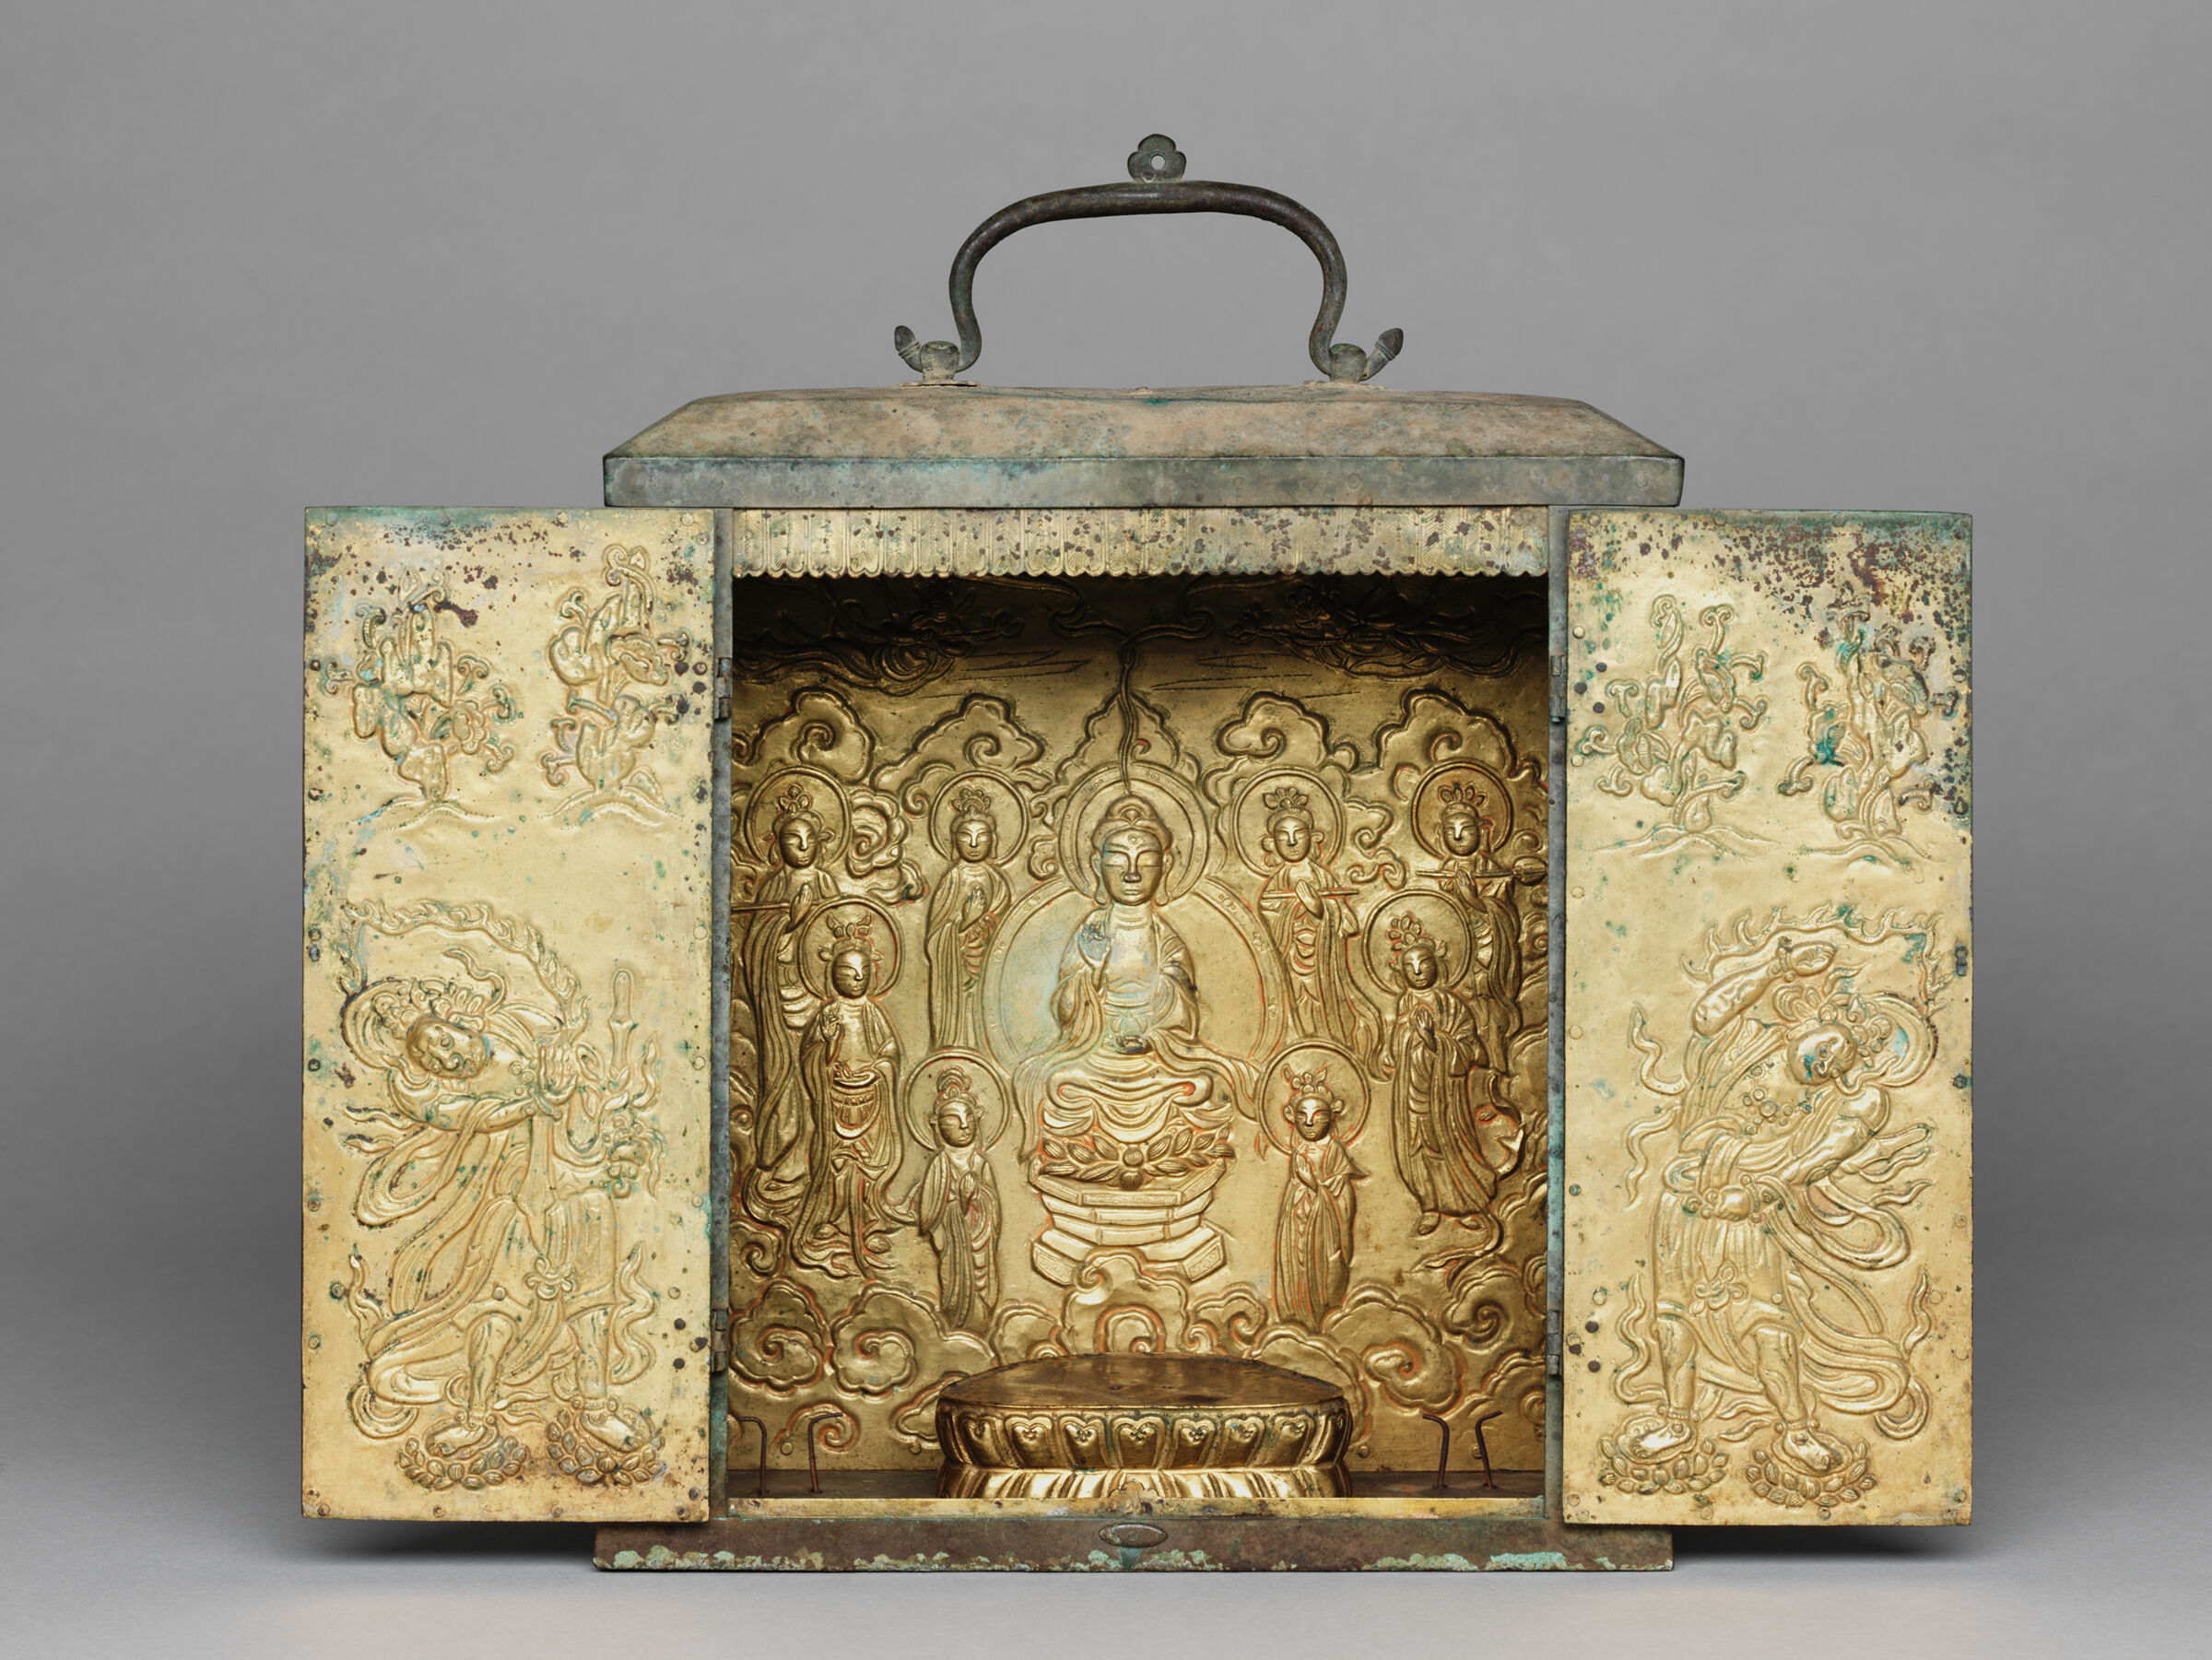 Portable Buddhist Shrine With Two Removable Standing Bodhisattvas, A Lotus Base For A Seated Buddha Image (Now Missing), A Repoussé Panel Depicting The Buddha Amitabha (Amit'abul), And Repoussé Panels On The Doors Representing Guardian Figures